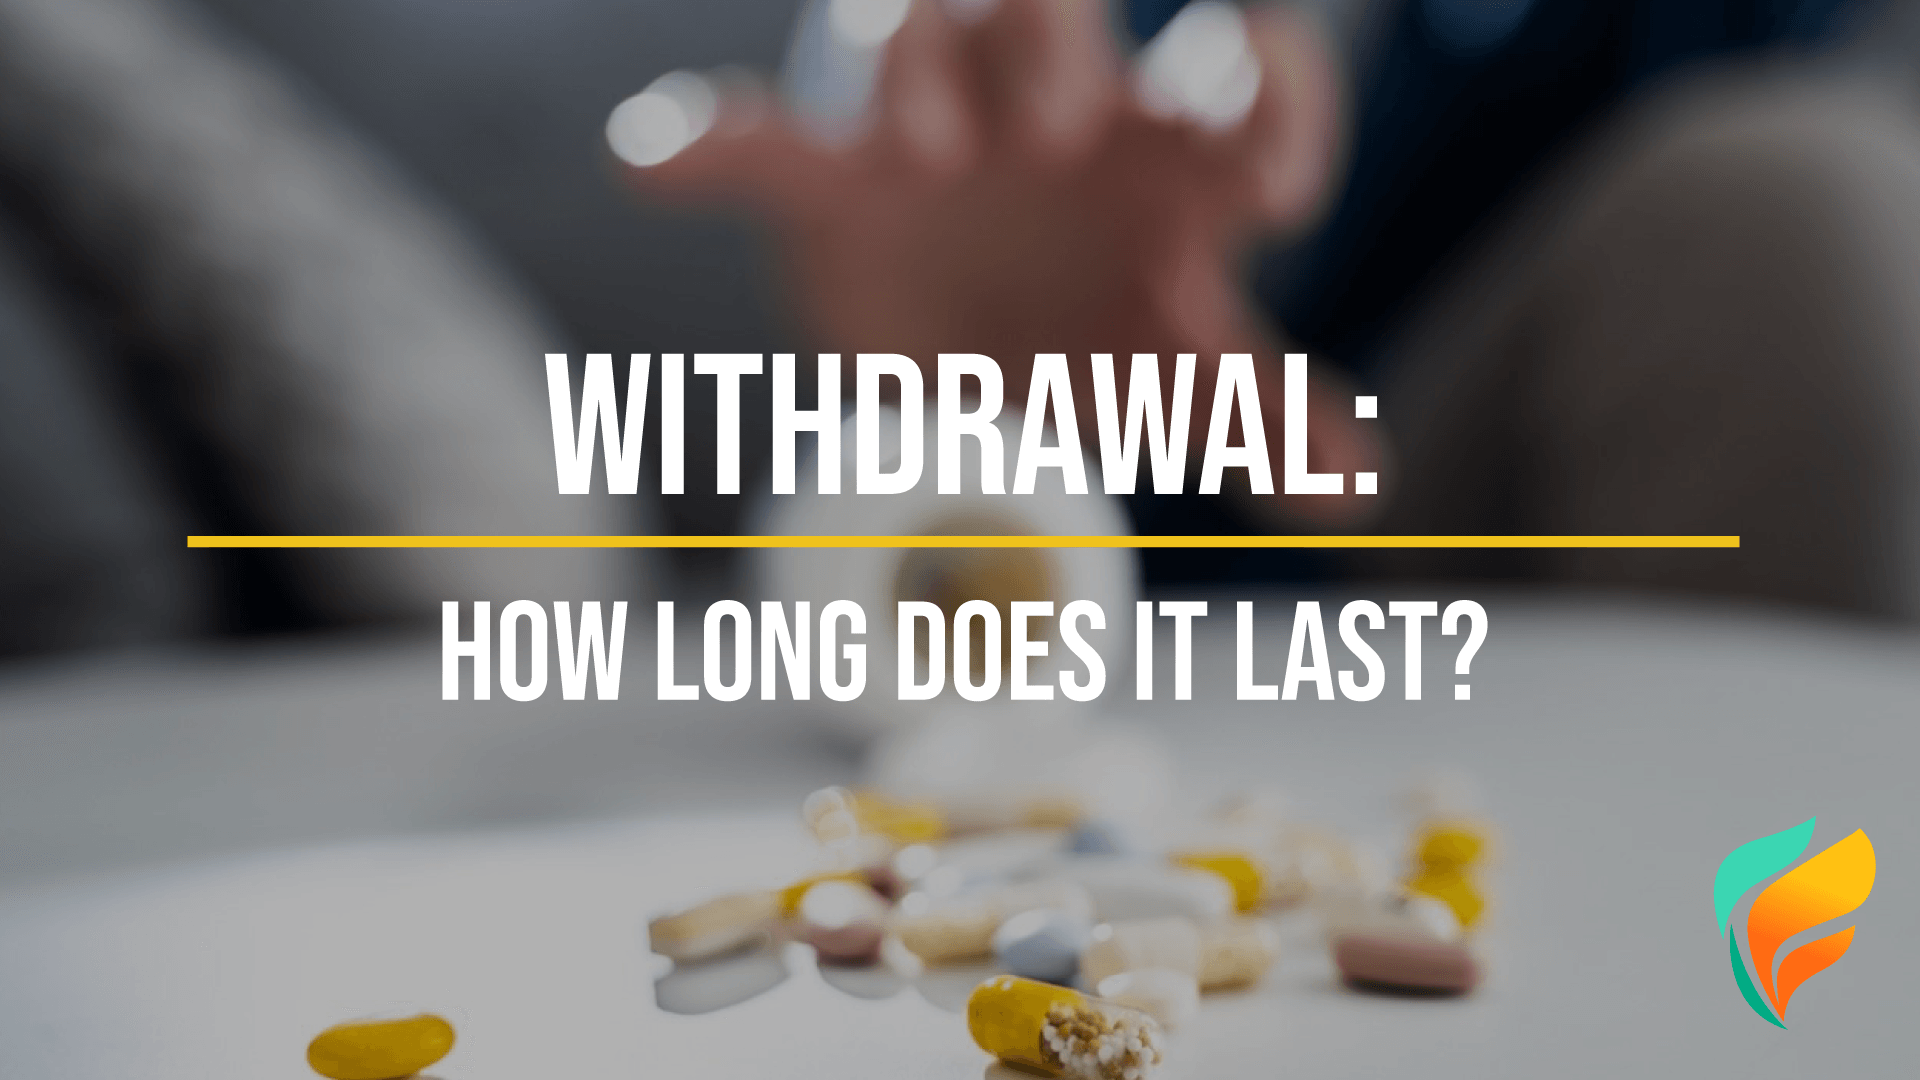 How Long Does Withdrawal From Drugs & Alcohol Last?